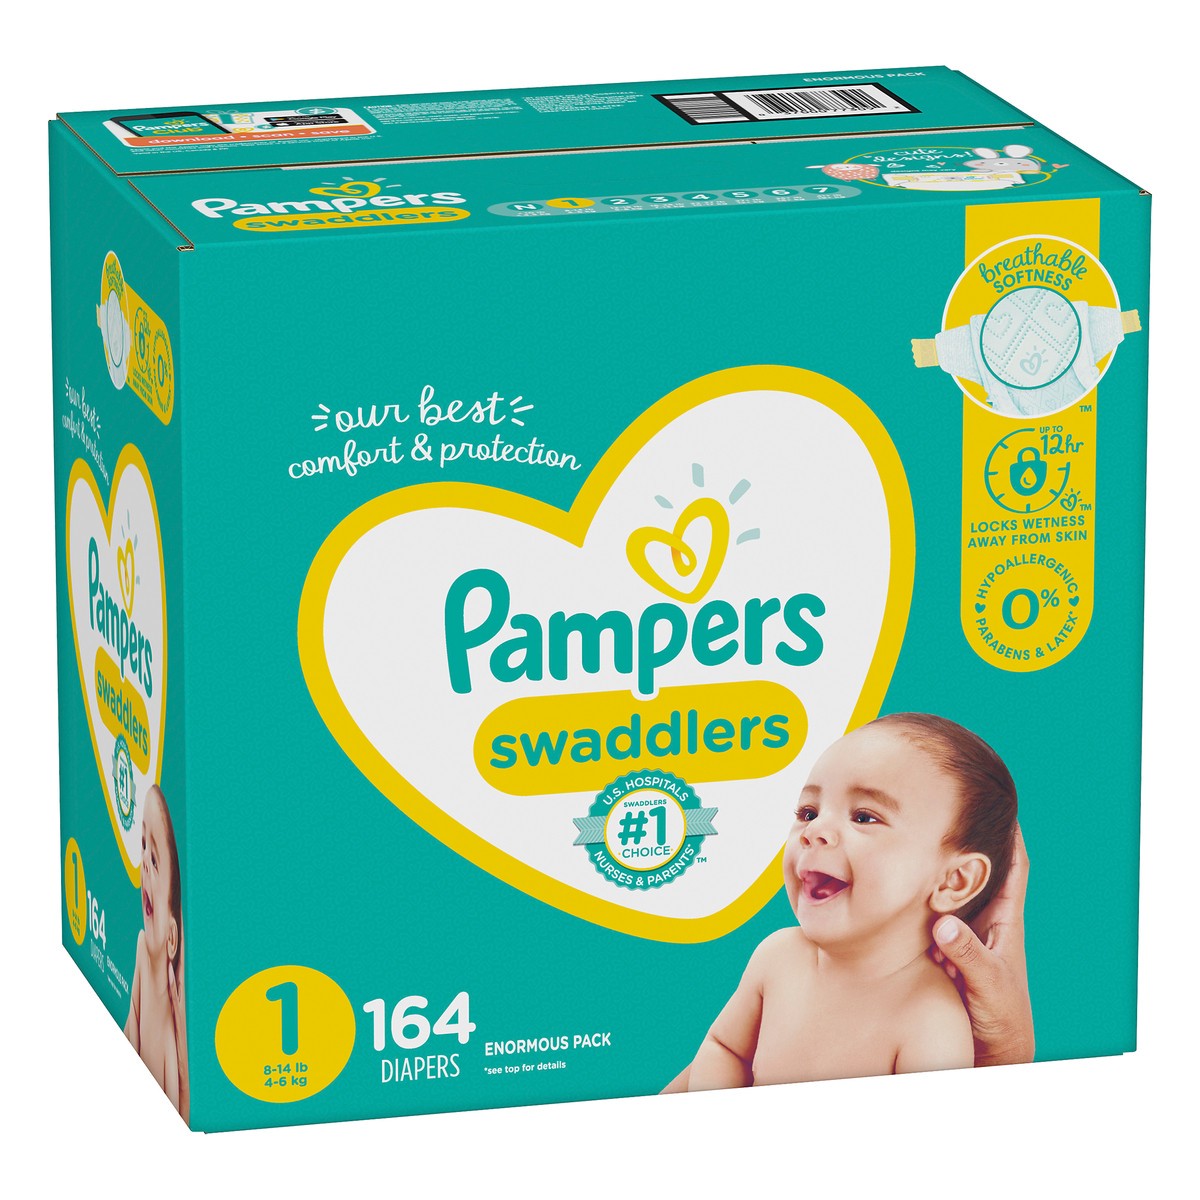 slide 3 of 6, Pampers Swaddlers Enormous Pack 1 (8-14 lb) Diapers 164 ea, 164 ct